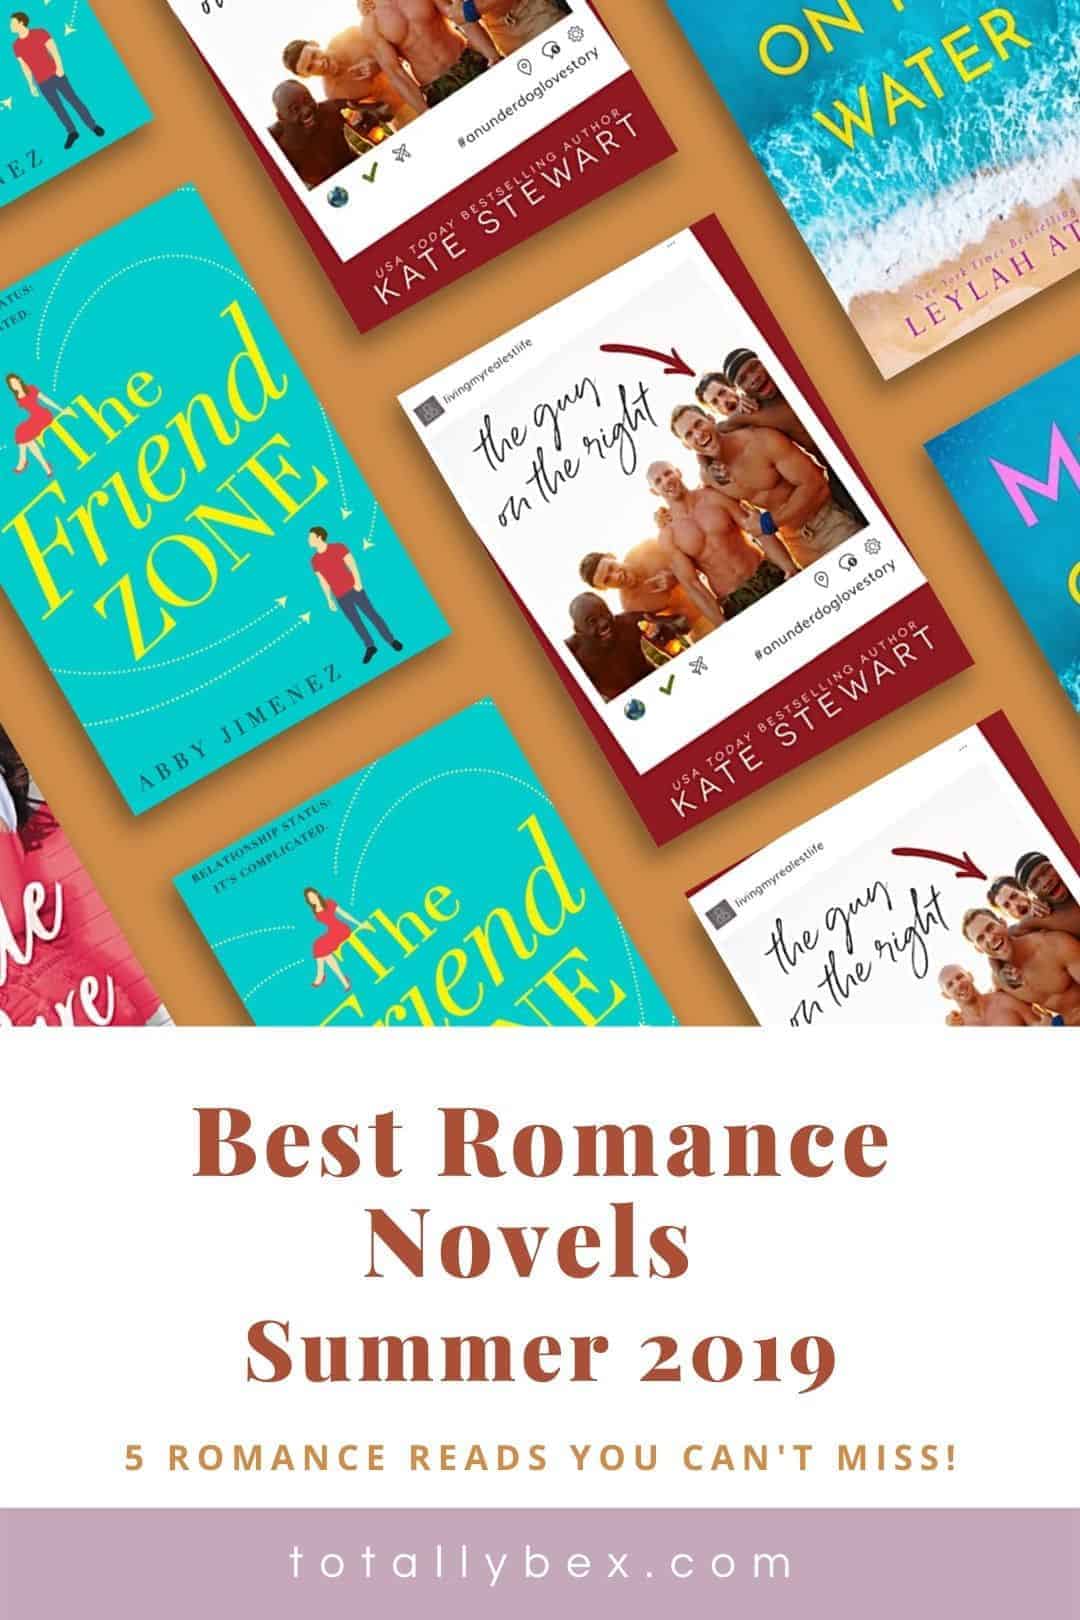 The Best Romance Novels Summer 2019: all about the 5 romance novels from this summer by Kate Stewart, Helena Hunting, Abby Jimenez, Emma Chase, and Leylah Attar!